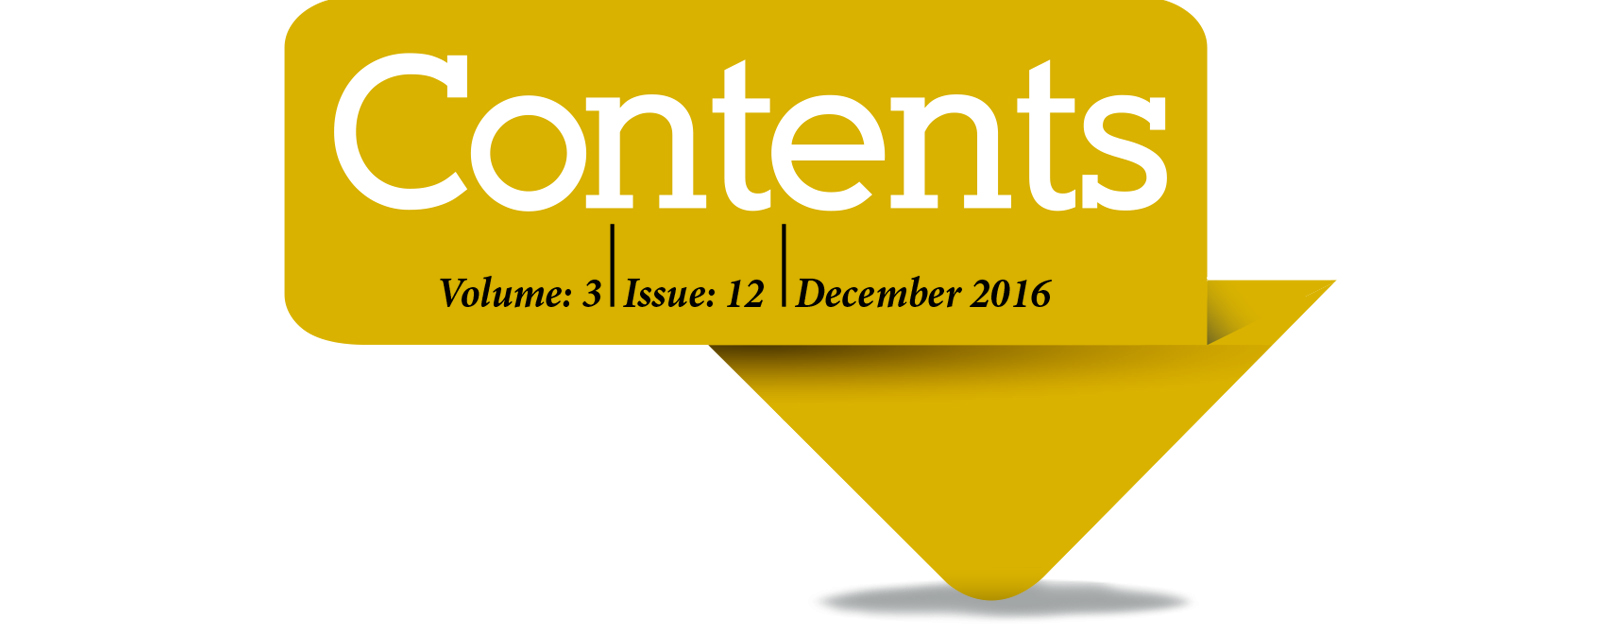 Contents December 2016 March 2018 issue